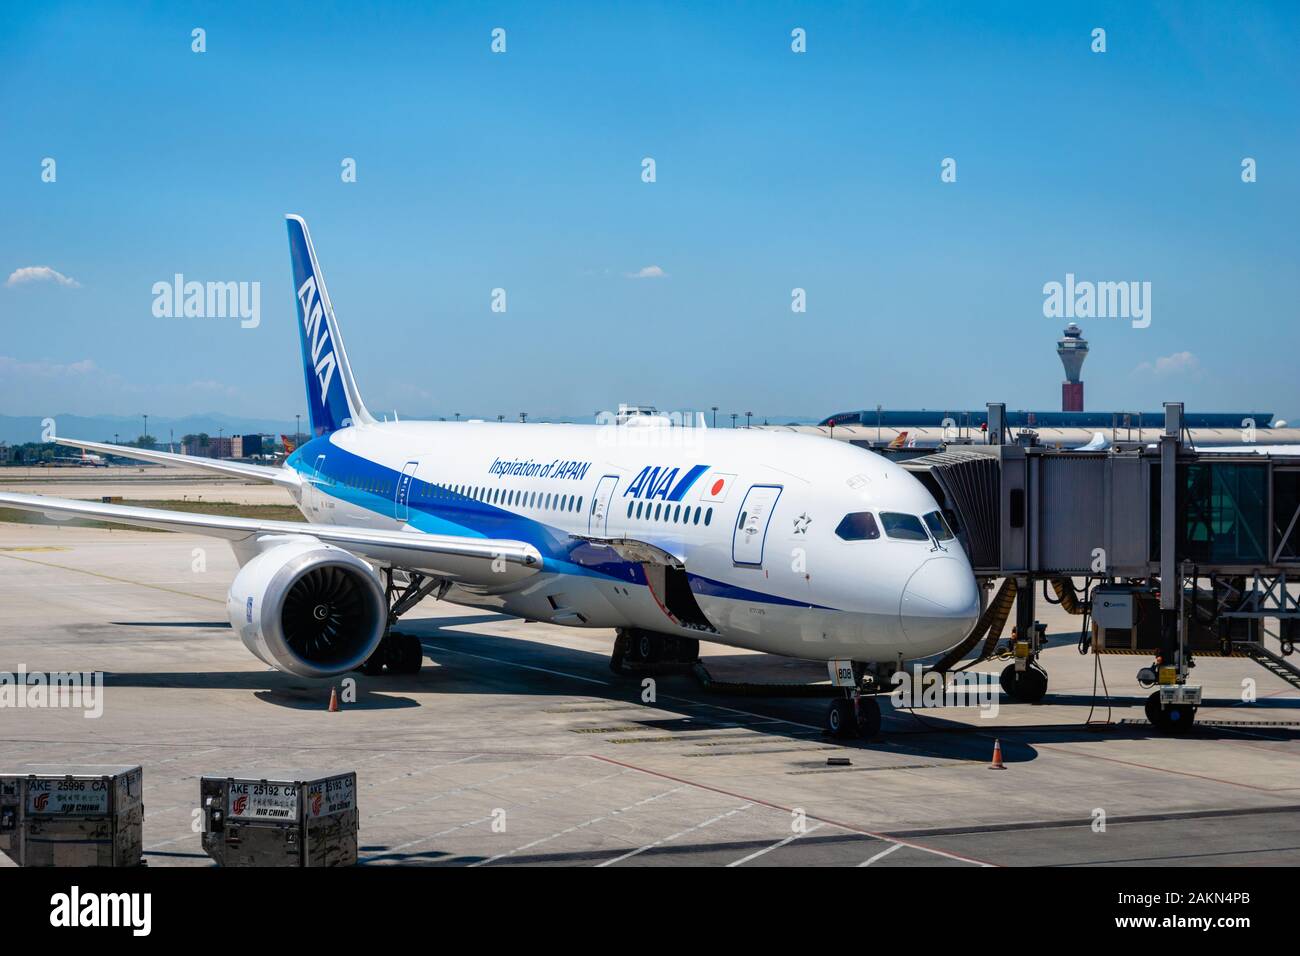 Beijng, China - July 2019: ANA, Air Nippon airways, aircraft landed at Beijing airport. ANA is the largest airline in Japan Stock Photo